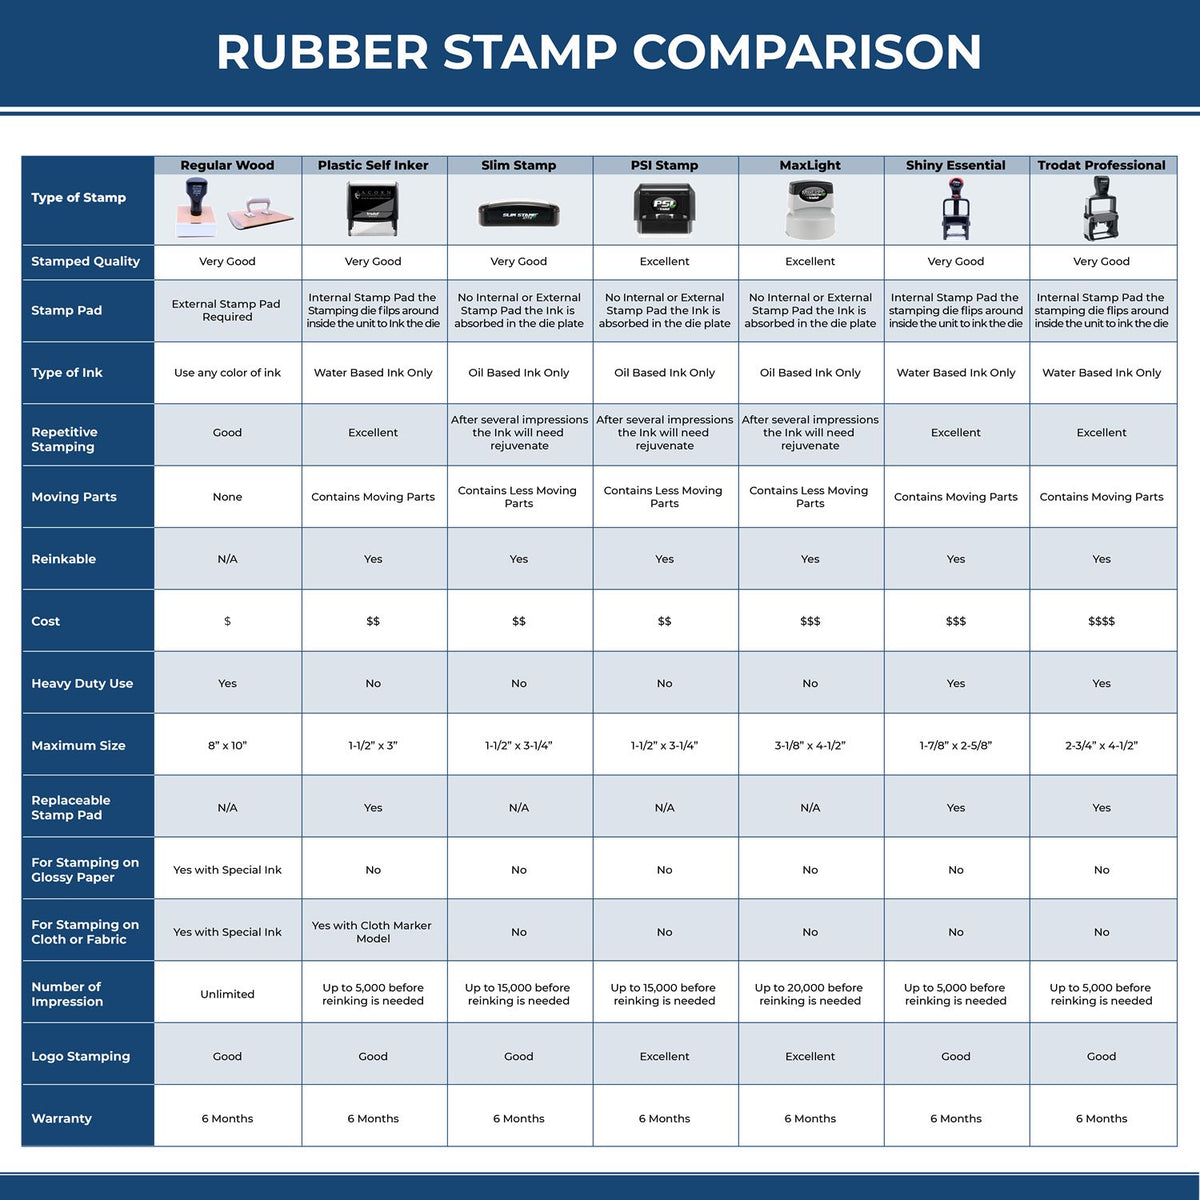 A comparison chart for the different types of mount models available for the Rhode Island Professional Engineer Seal Stamp.